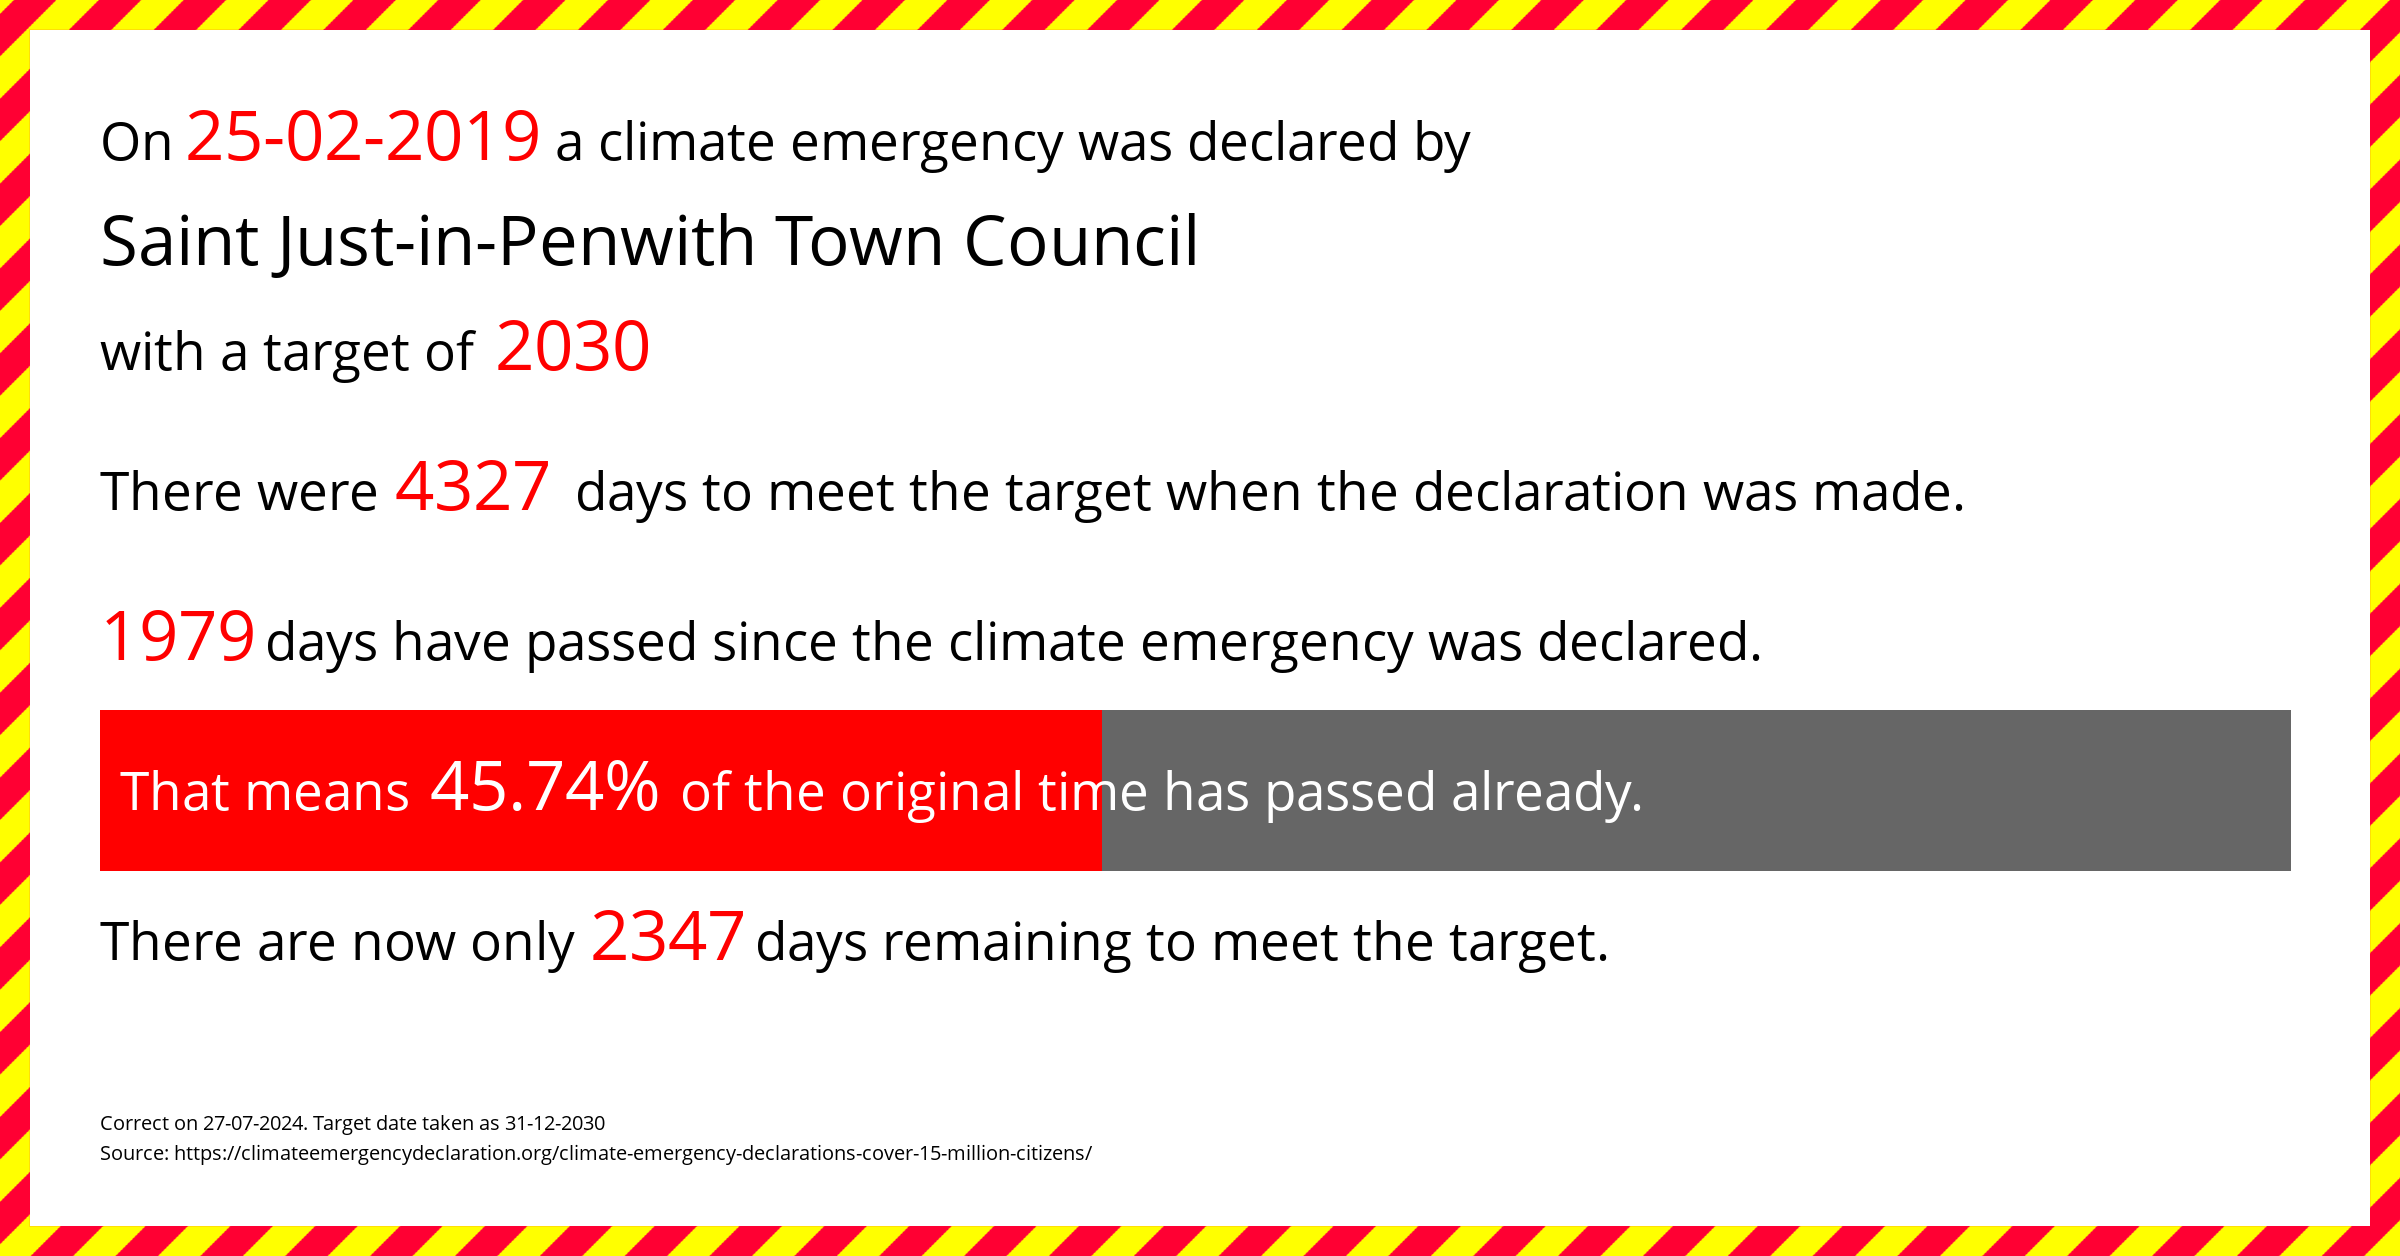 Saint Just-in-Penwith Town Council declared a Climate emergency on Monday 25th February 2019, with a target of 2030.